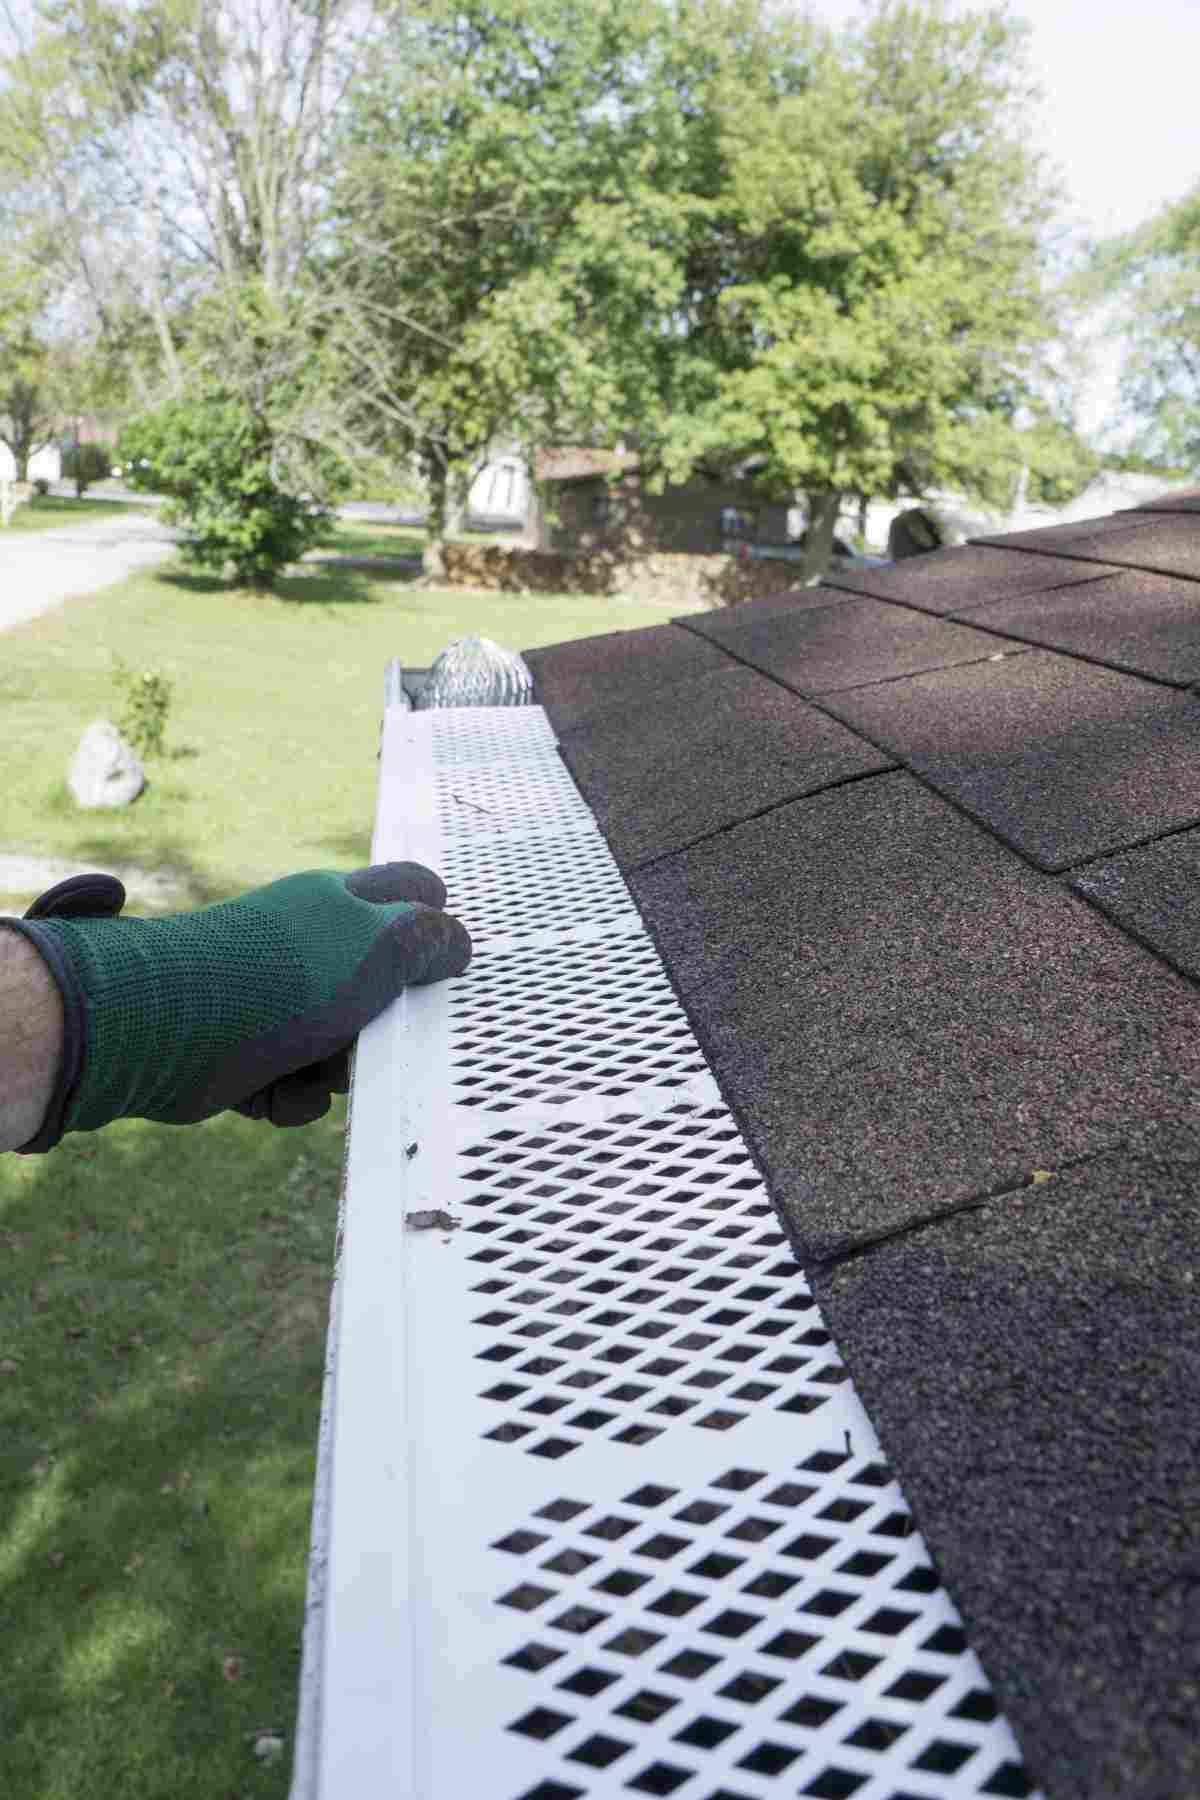 image showing hand covered by gloved installing gutter guard